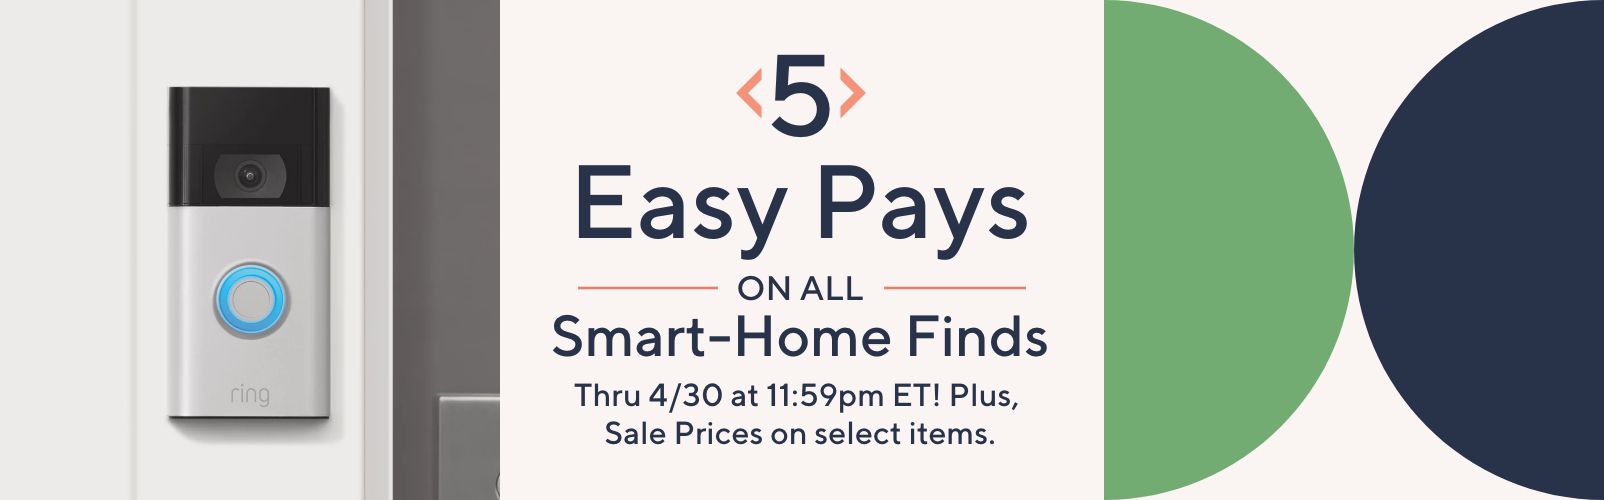 5 Easy Pays on All Smart-Home Finds. Thru 4/30 at 11:59pm ET! Plus, Sale Prices on select items.